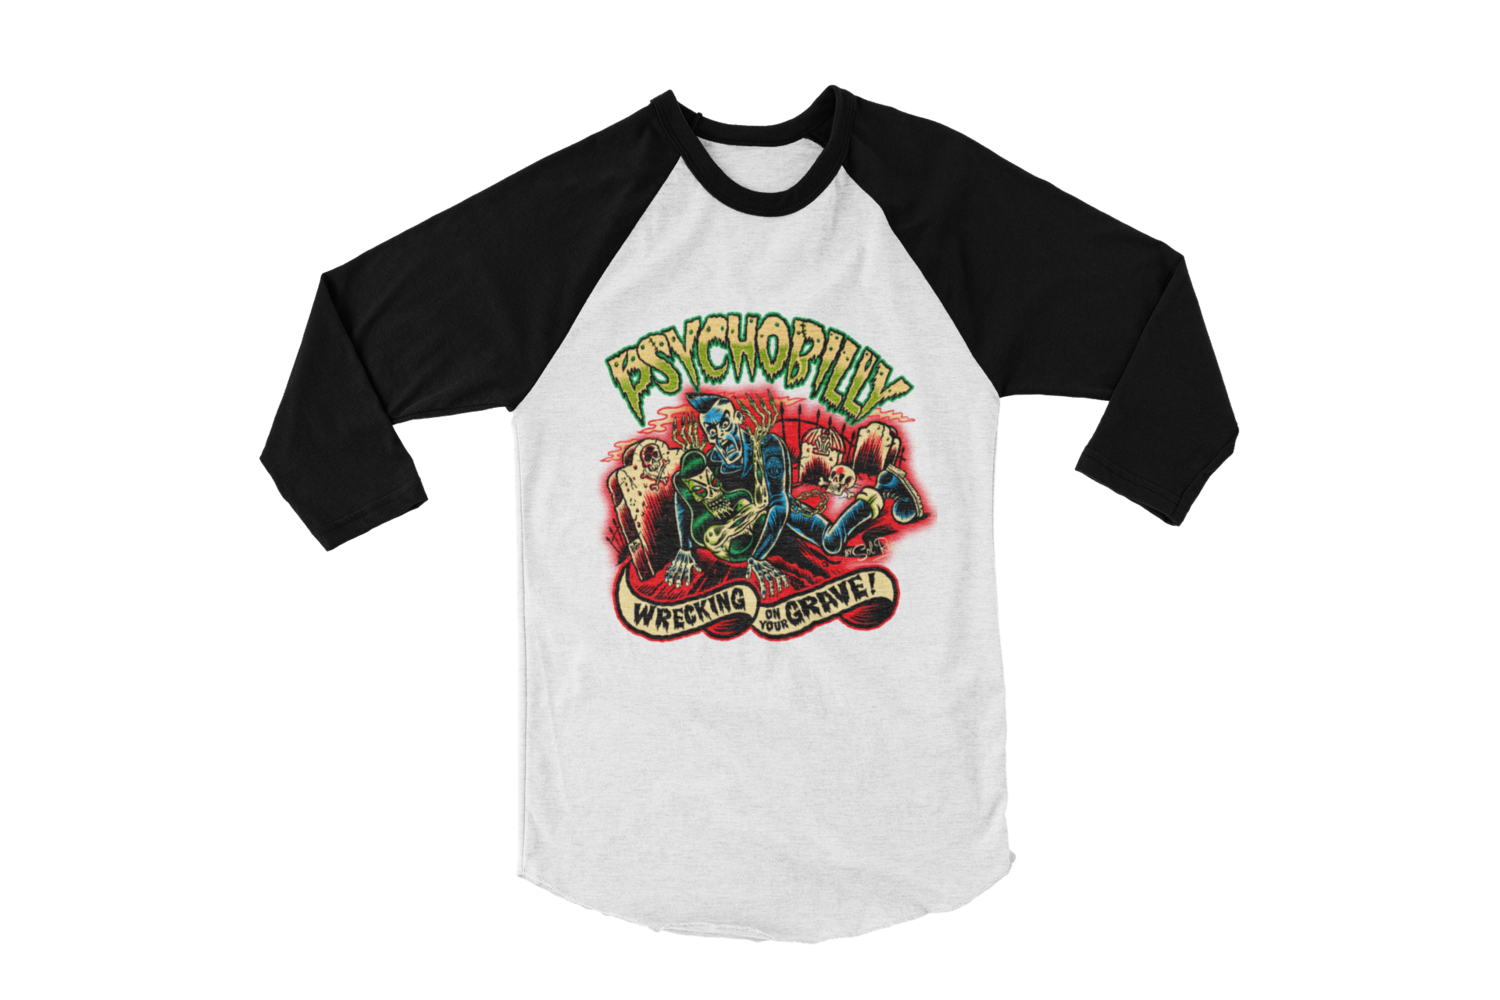 PSYCHOBILLY WRECKING ON YOUR GRAVE BASEBALL LONG SLEEVE By SOL RAC